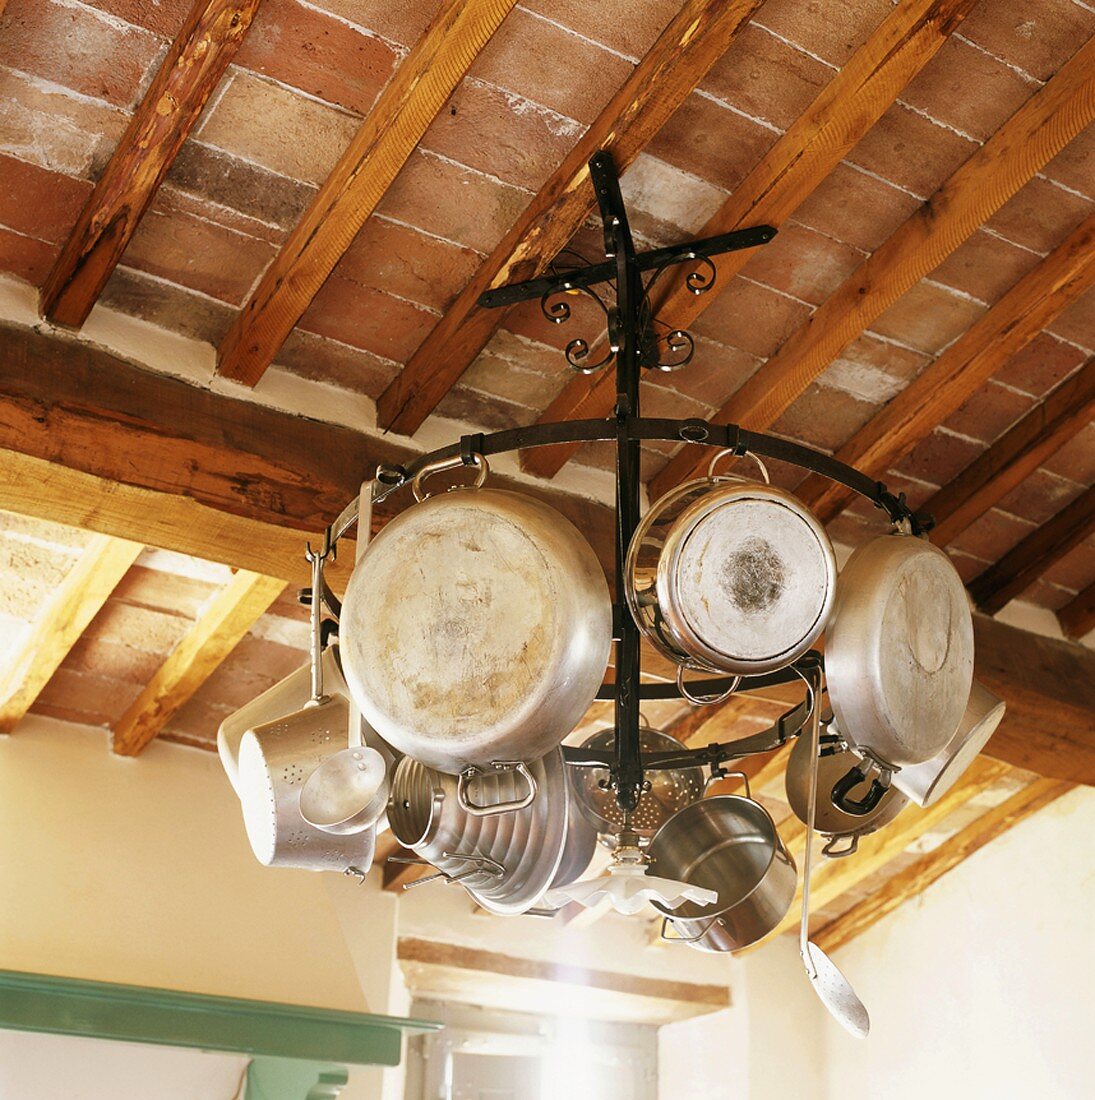 Pans hanging from ceiling